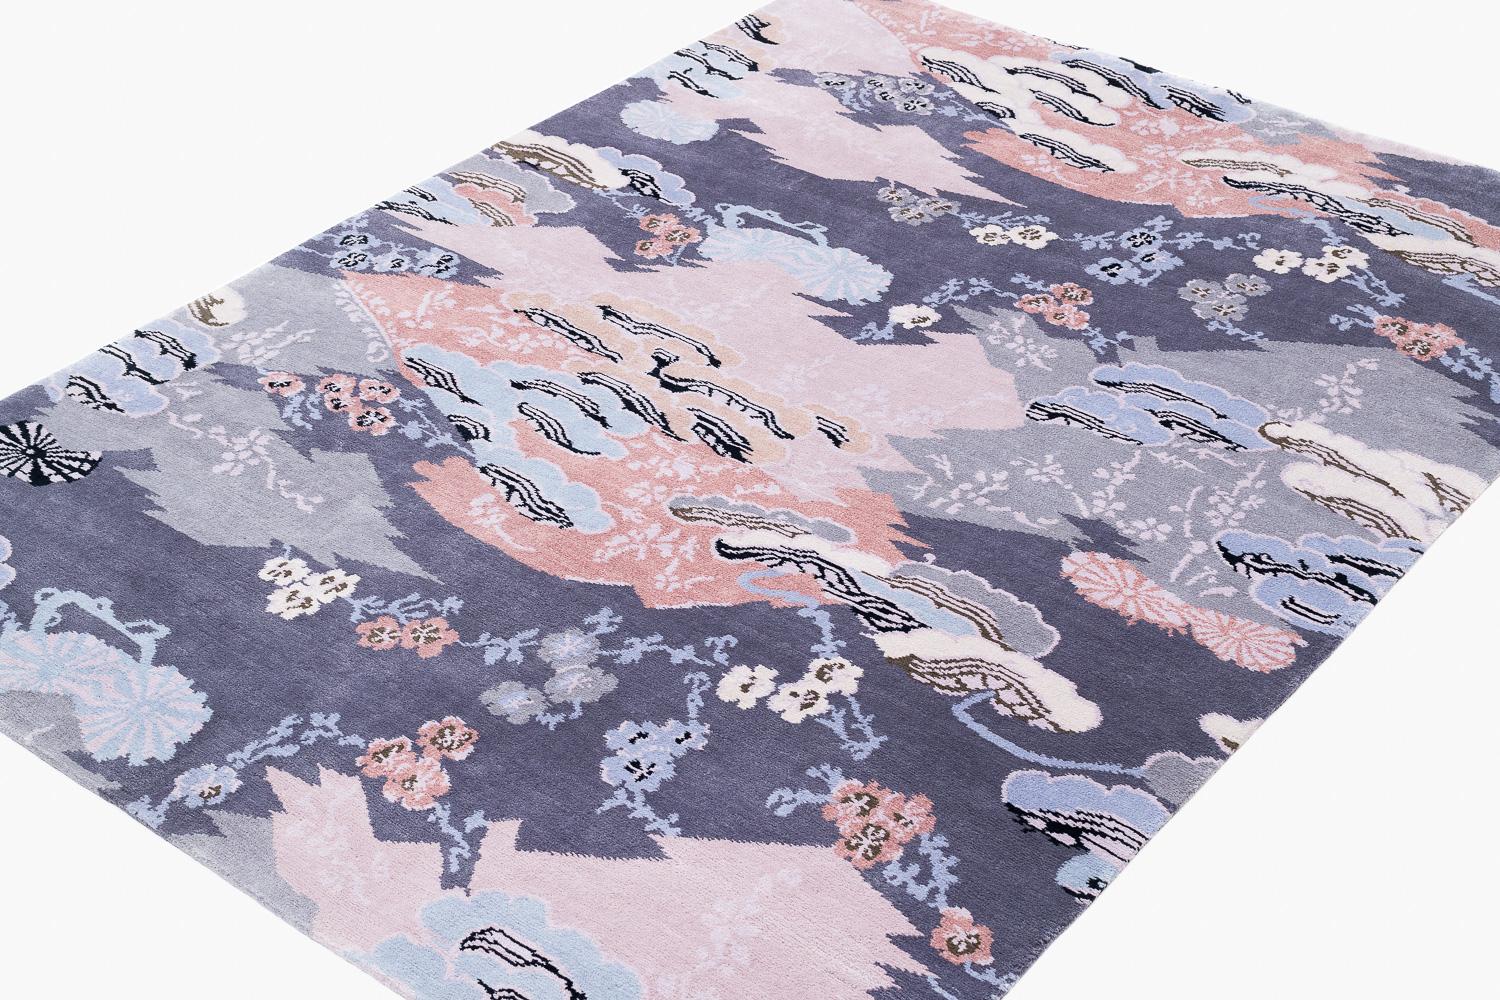 Delicate flowers and Eastern motifs are scattered throughout Mountain Blossom's pastel composition. The field of purple sets off the multicolored designs of pinks, whites, blues, and black in this wool and silk blend carpet. Original design by